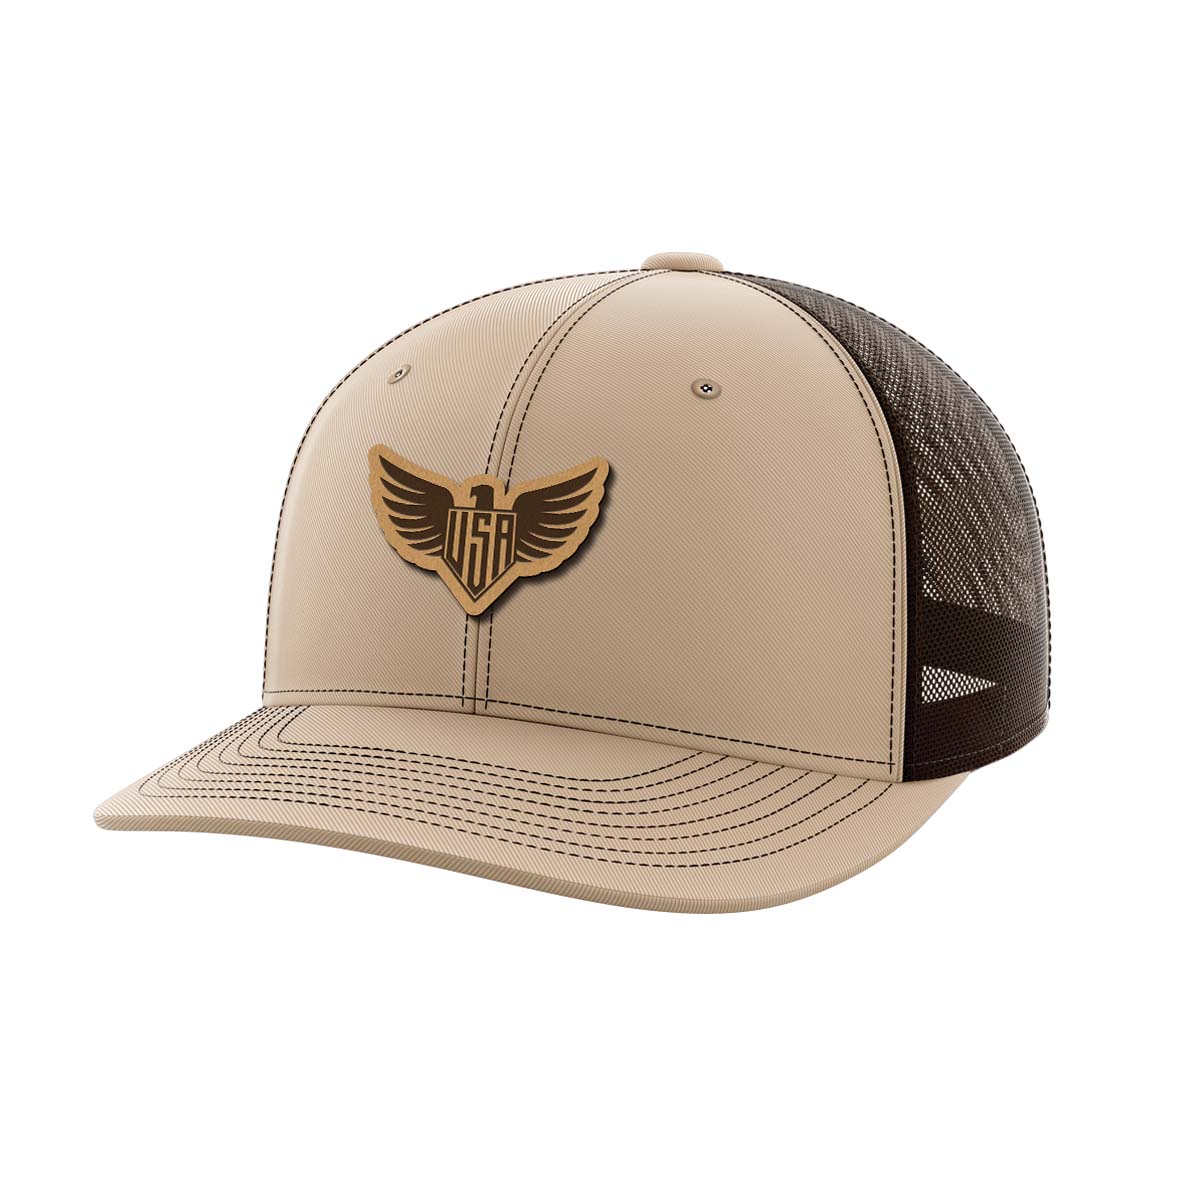 Eagle USA Leather Patch Hat - Greater Half